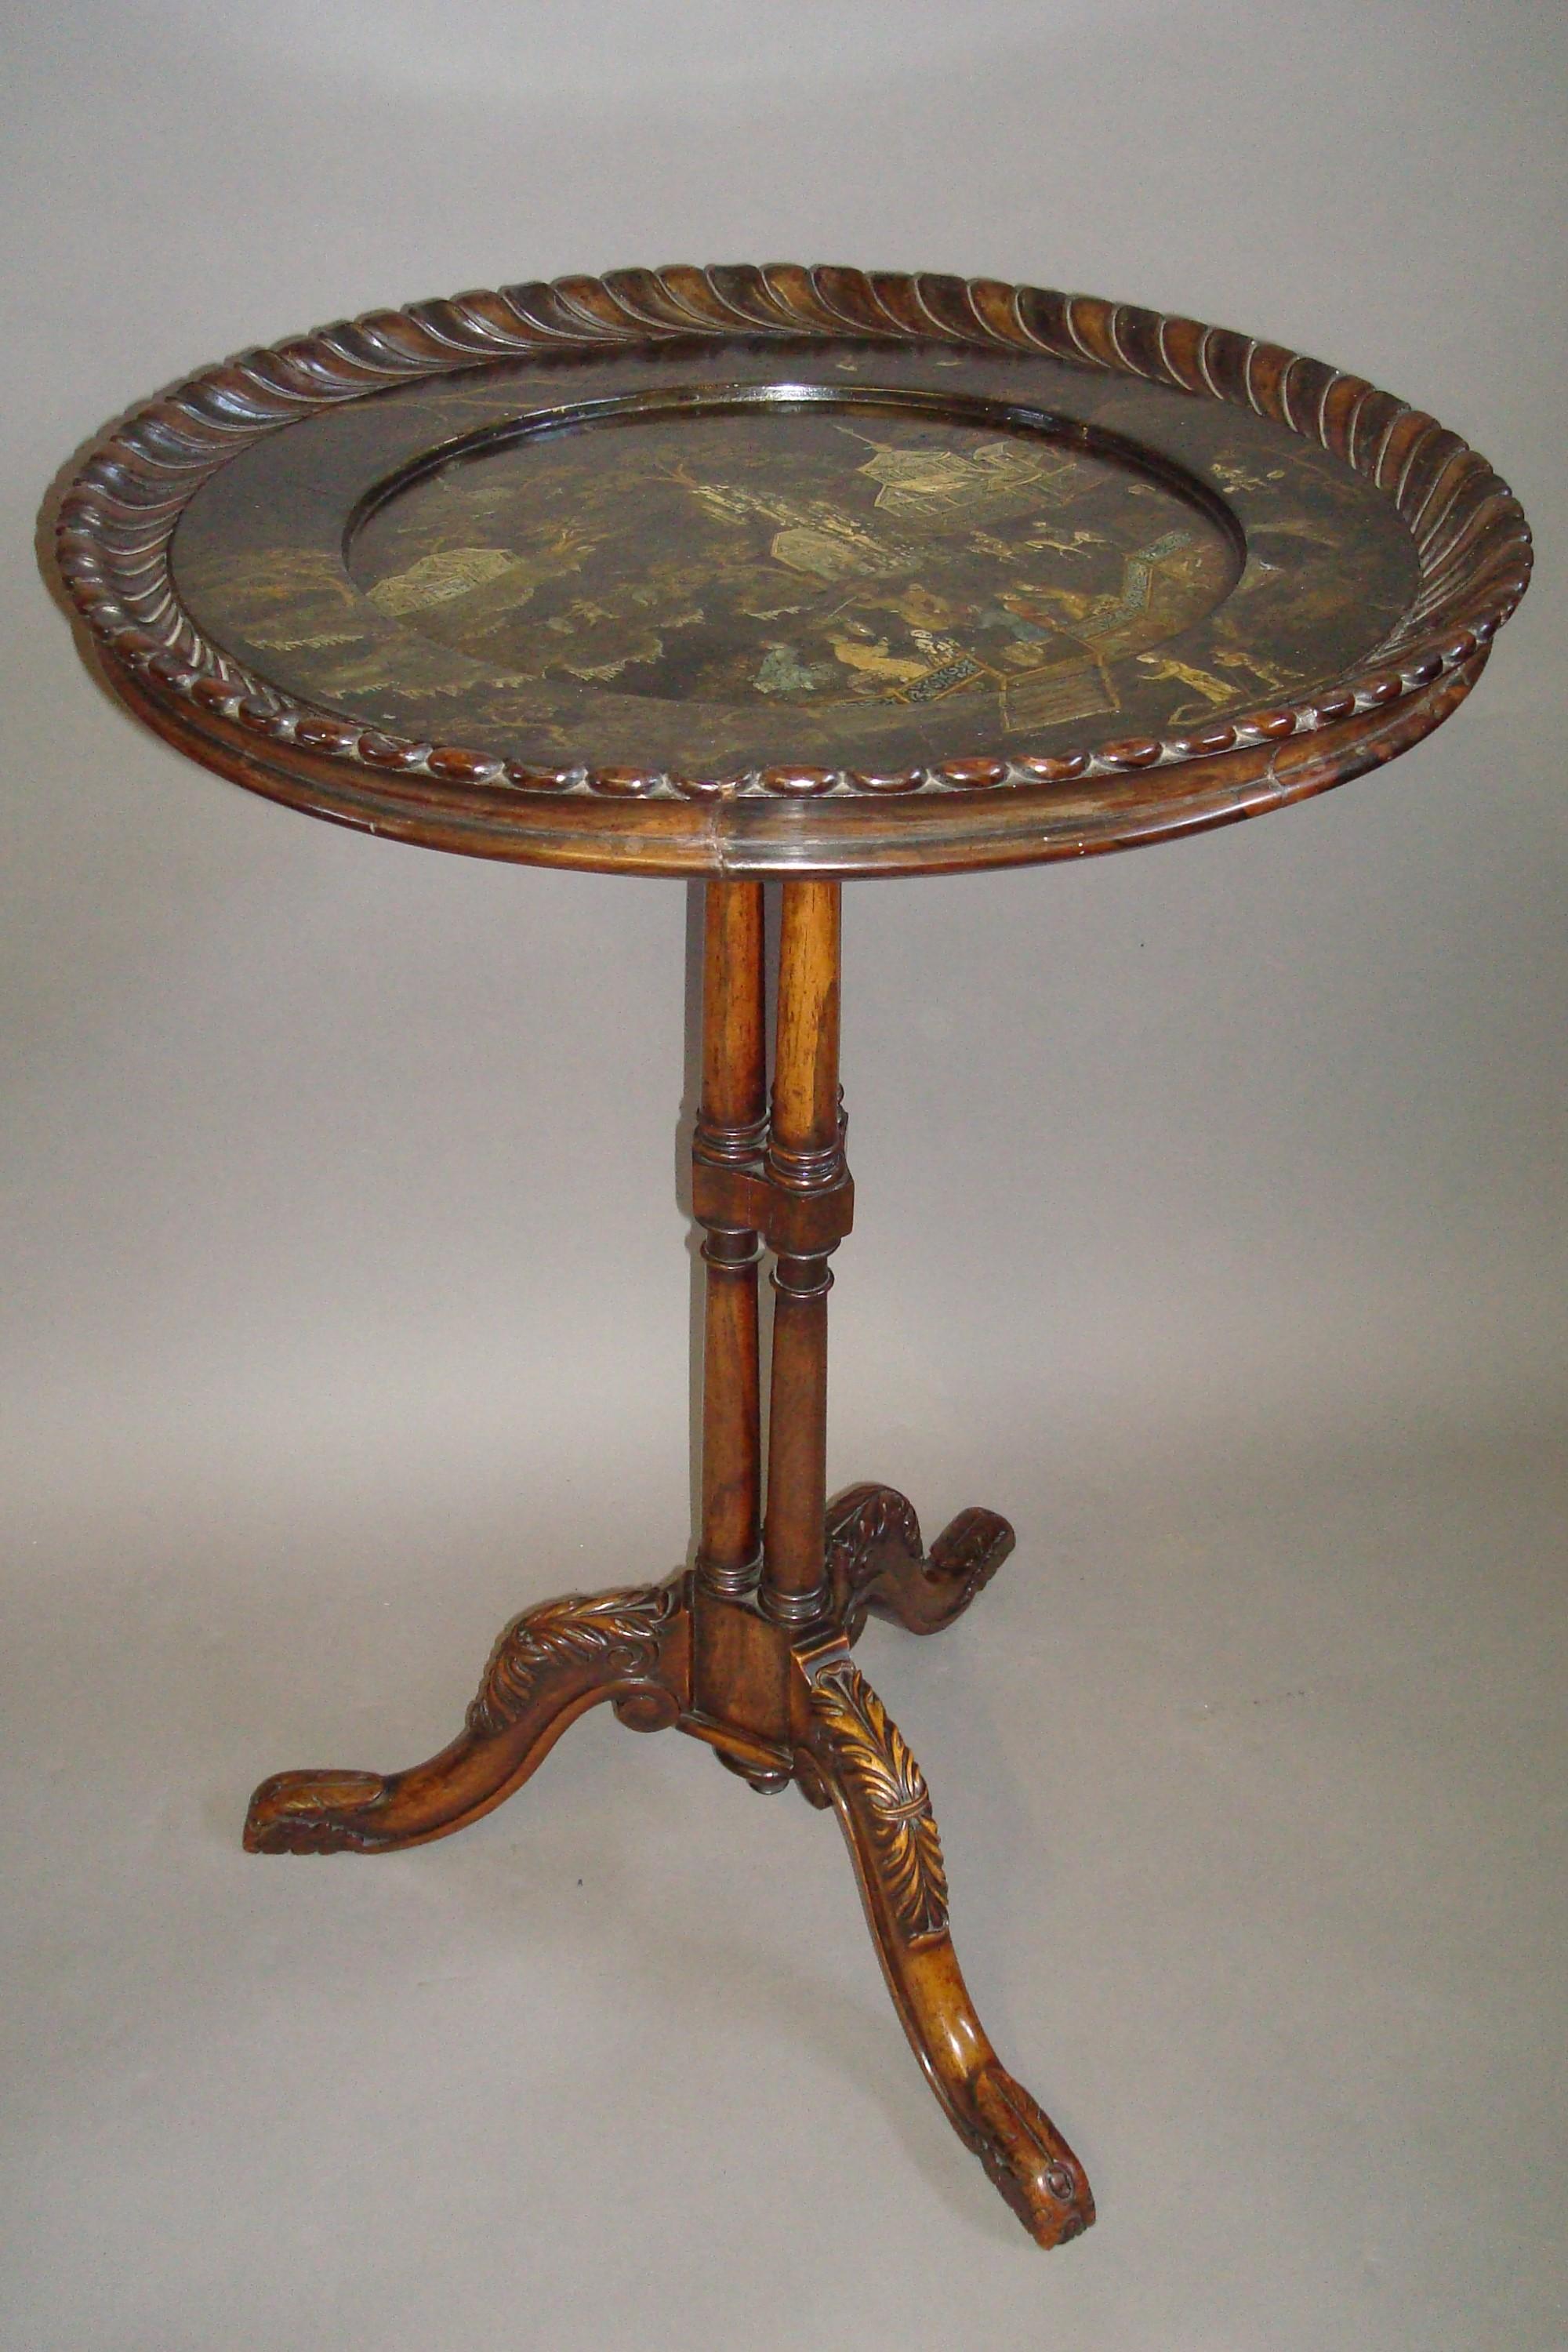 Regency Rosewood and Papier Mâché Tripod Table In Good Condition For Sale In Moreton-in-Marsh, Gloucestershire